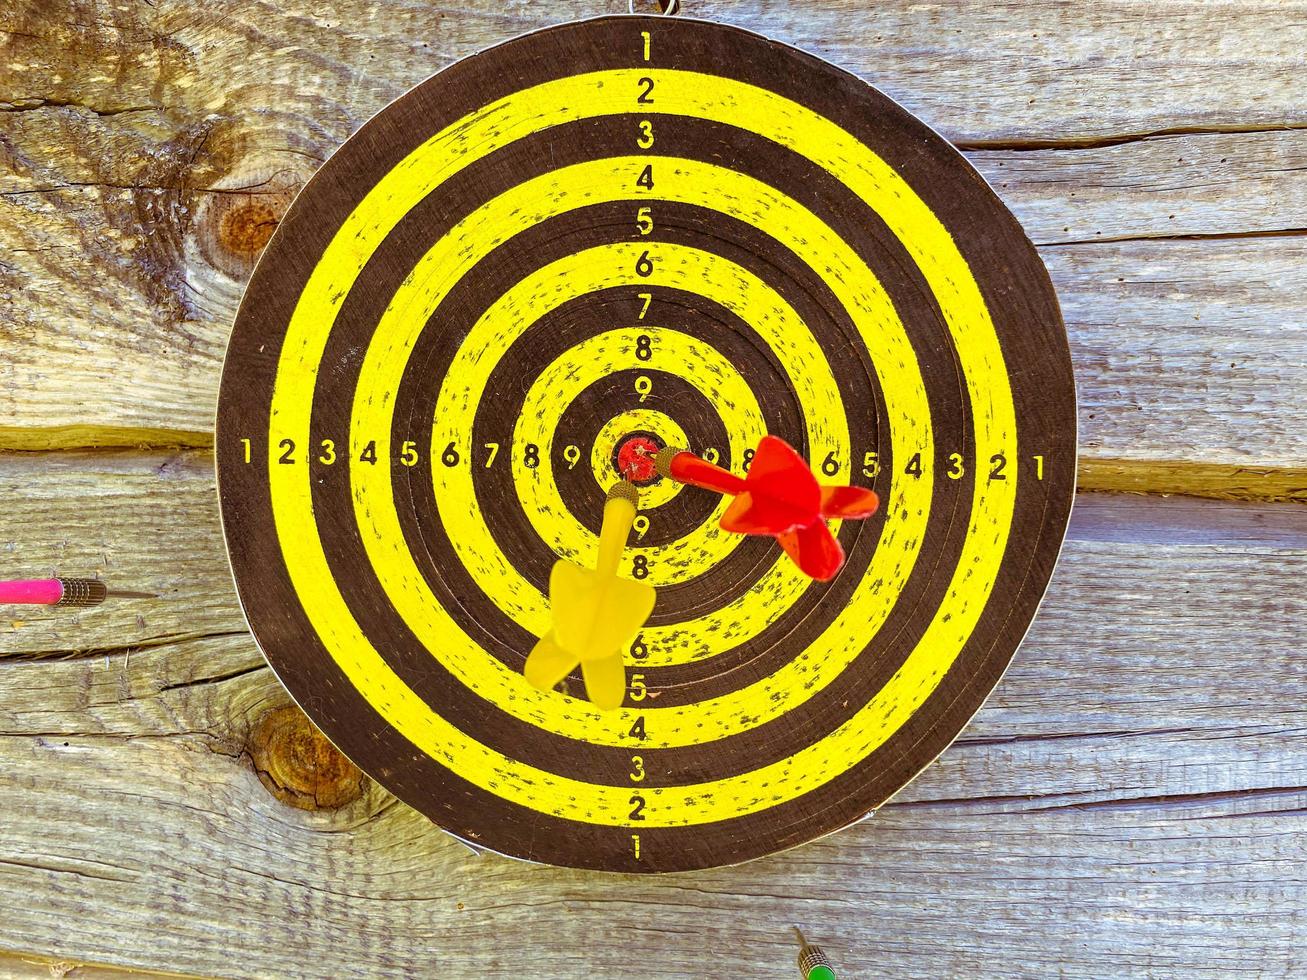 active play. throwing darts. darts outdoors. round field with black and yellow markings. inside bright darts in the center, hitting the center of the circle photo